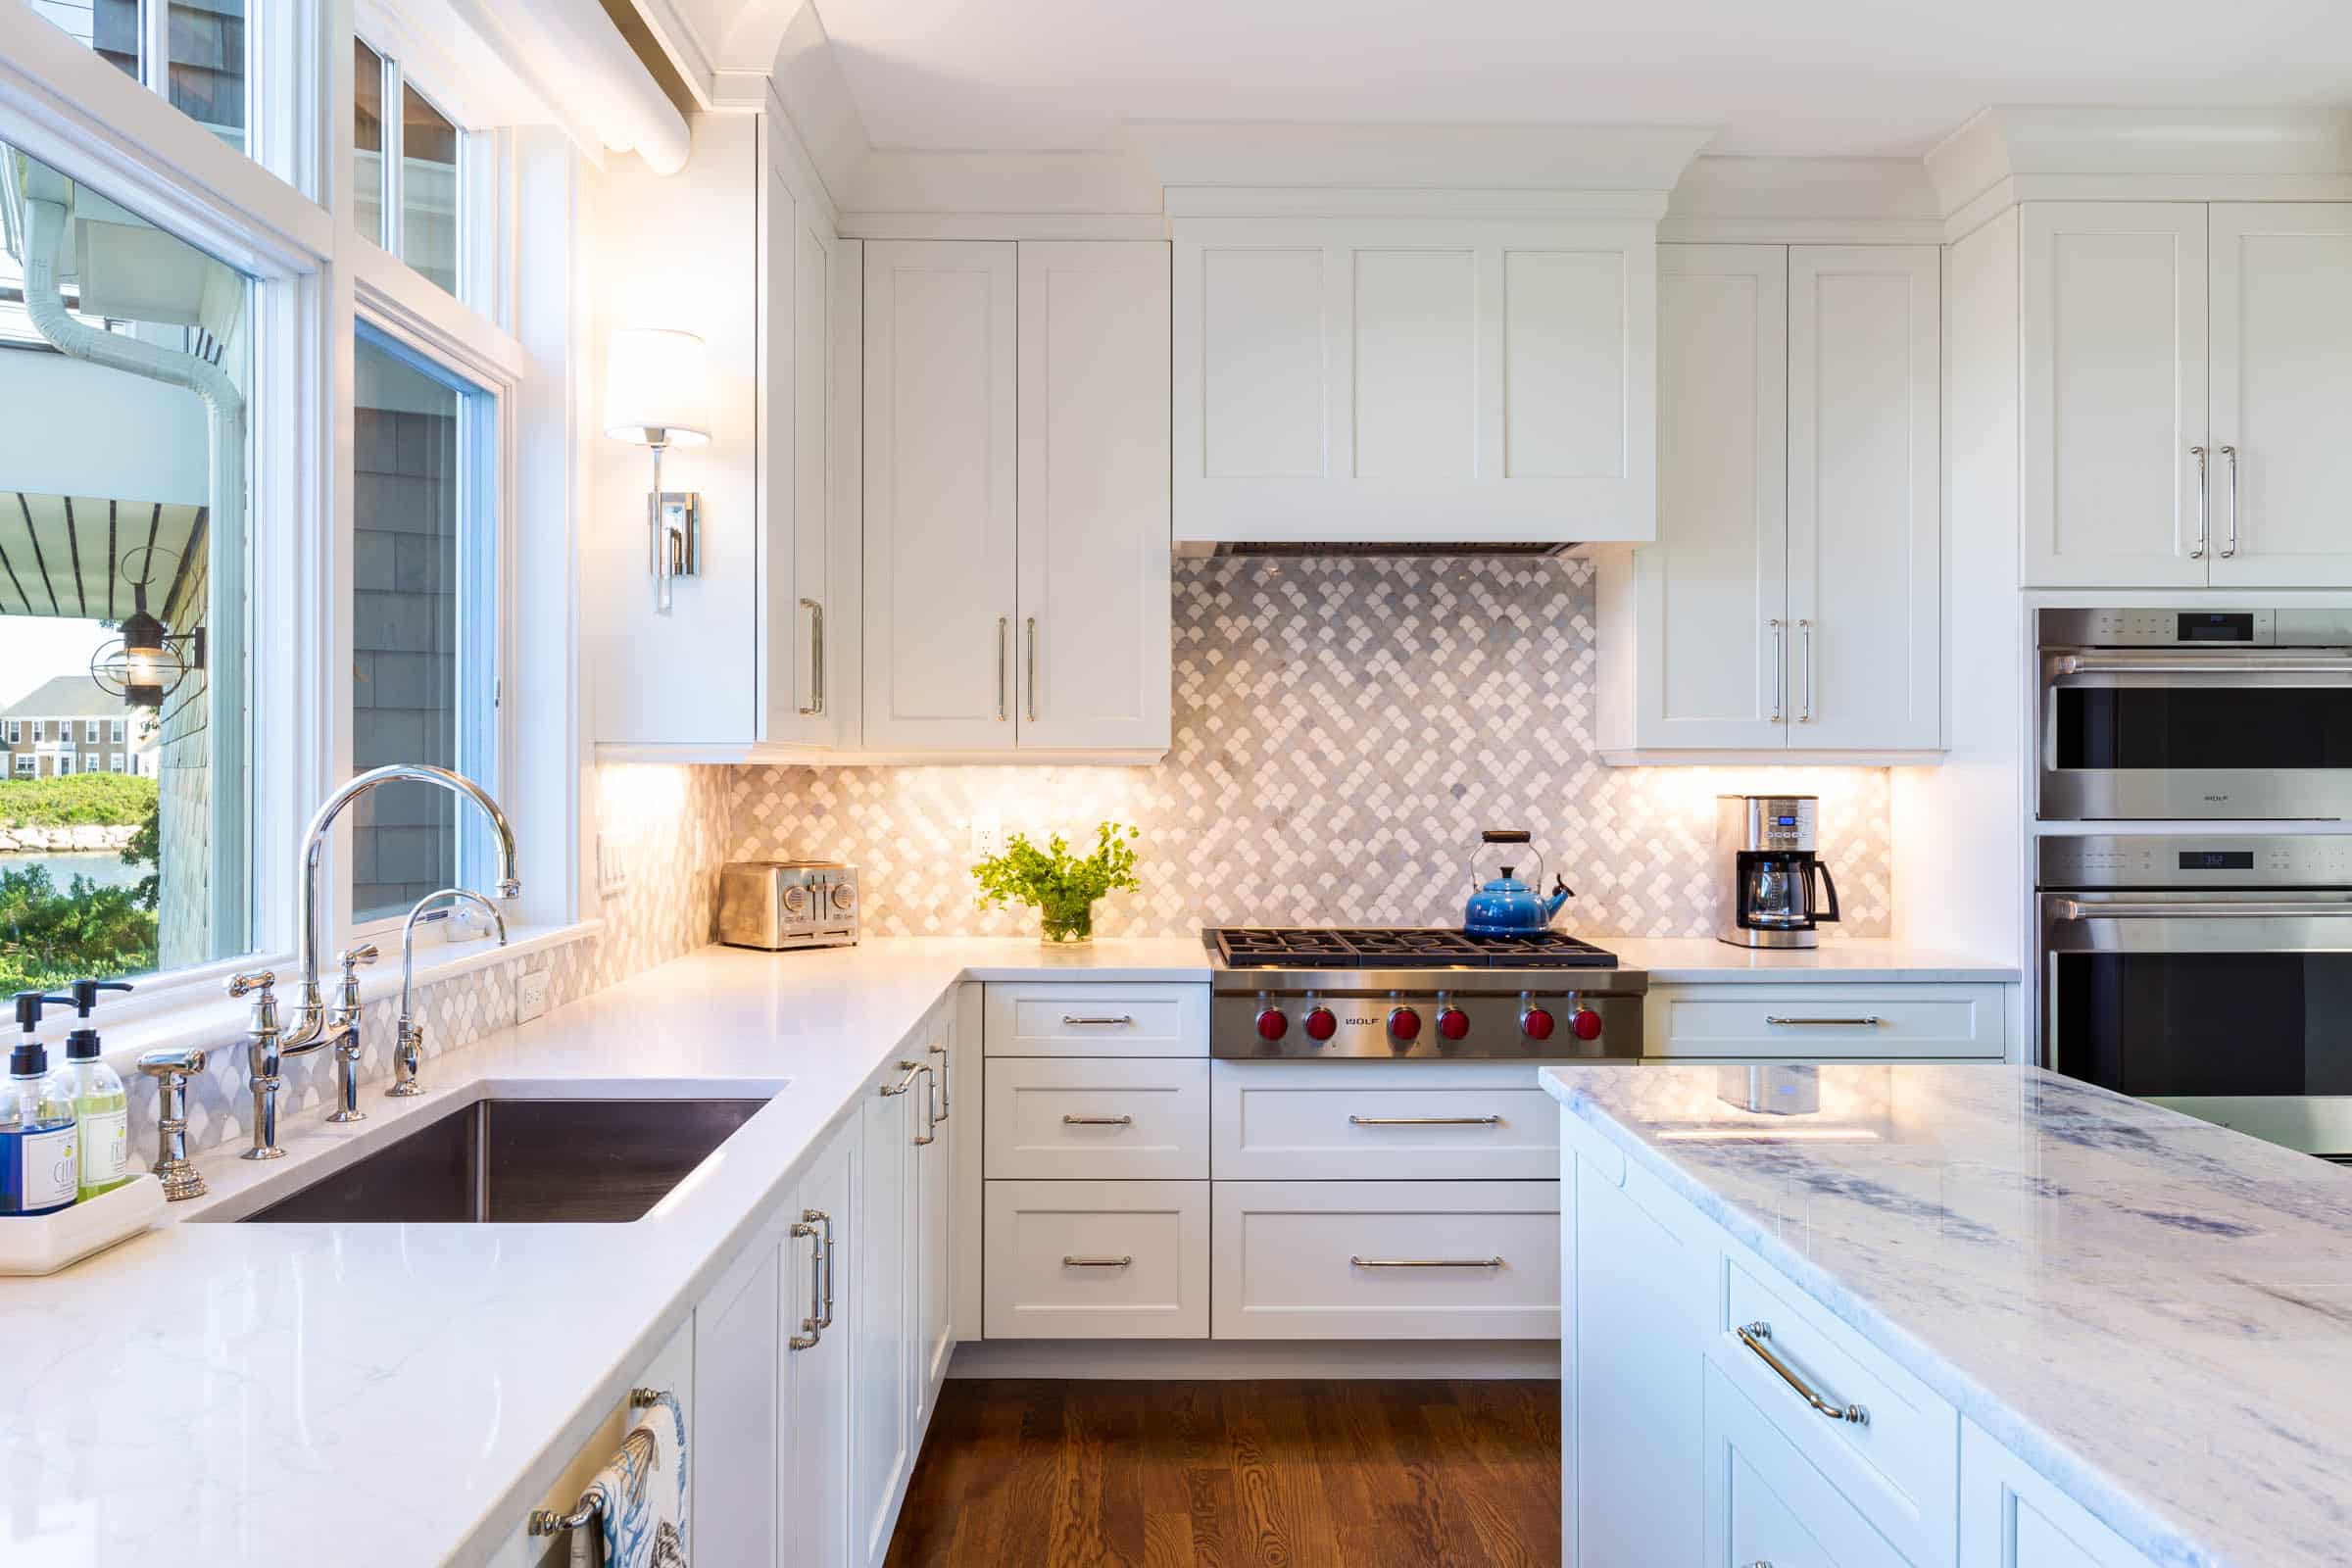 white cabinets are often associated with light and airy kitchens,